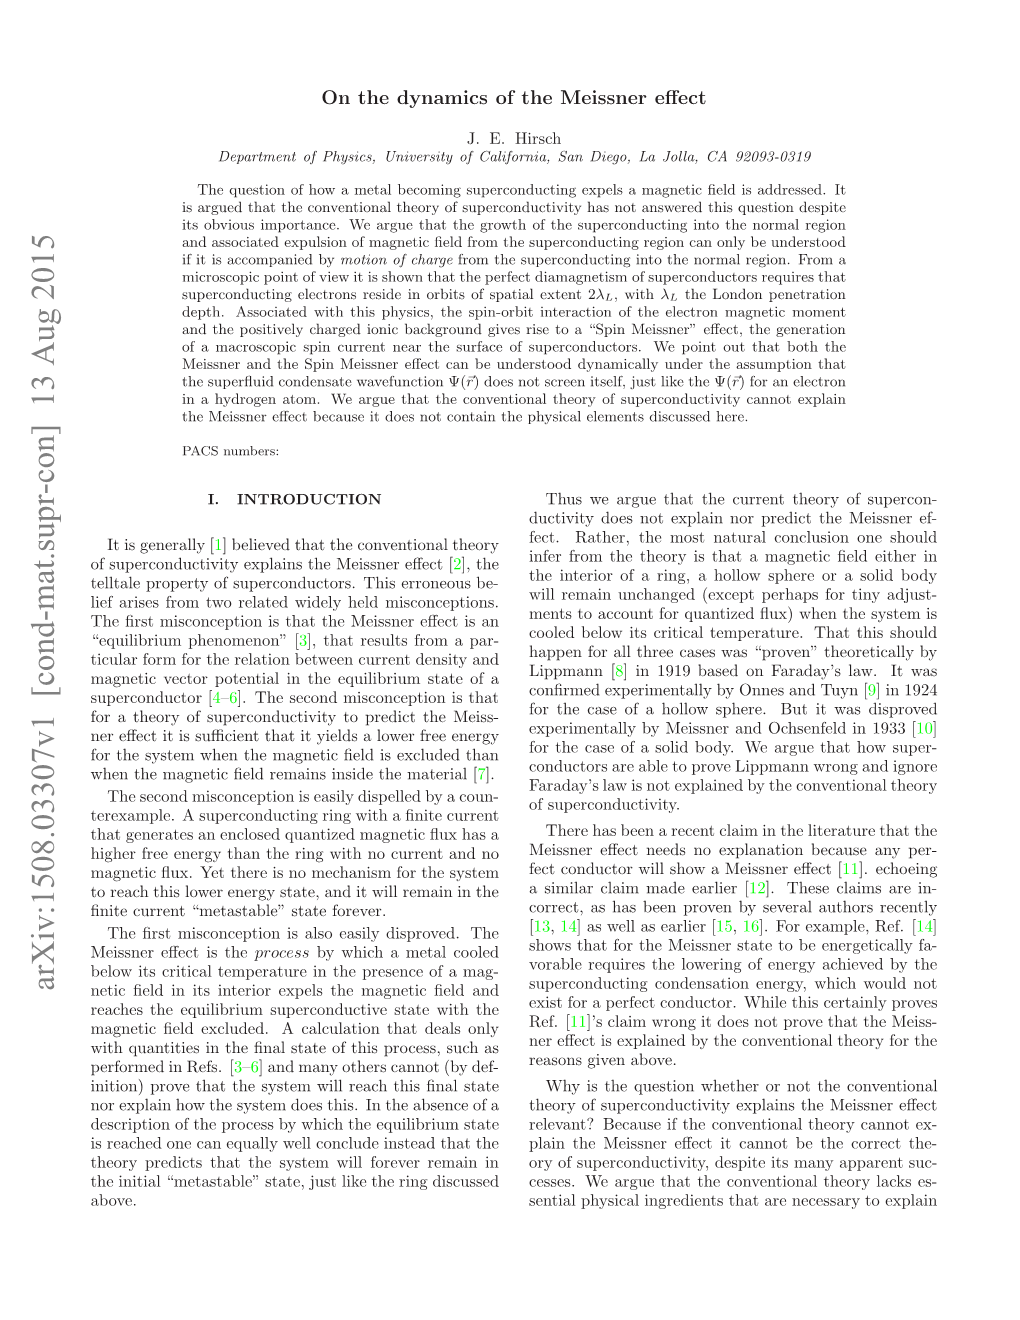 Arxiv:1508.03307V1 [Cond-Mat.Supr-Con] 13 Aug 2015 Ihqatte Nteﬁa Tt Fti Rcs,Sc As Such Process, This Only [ of Deals State Refs